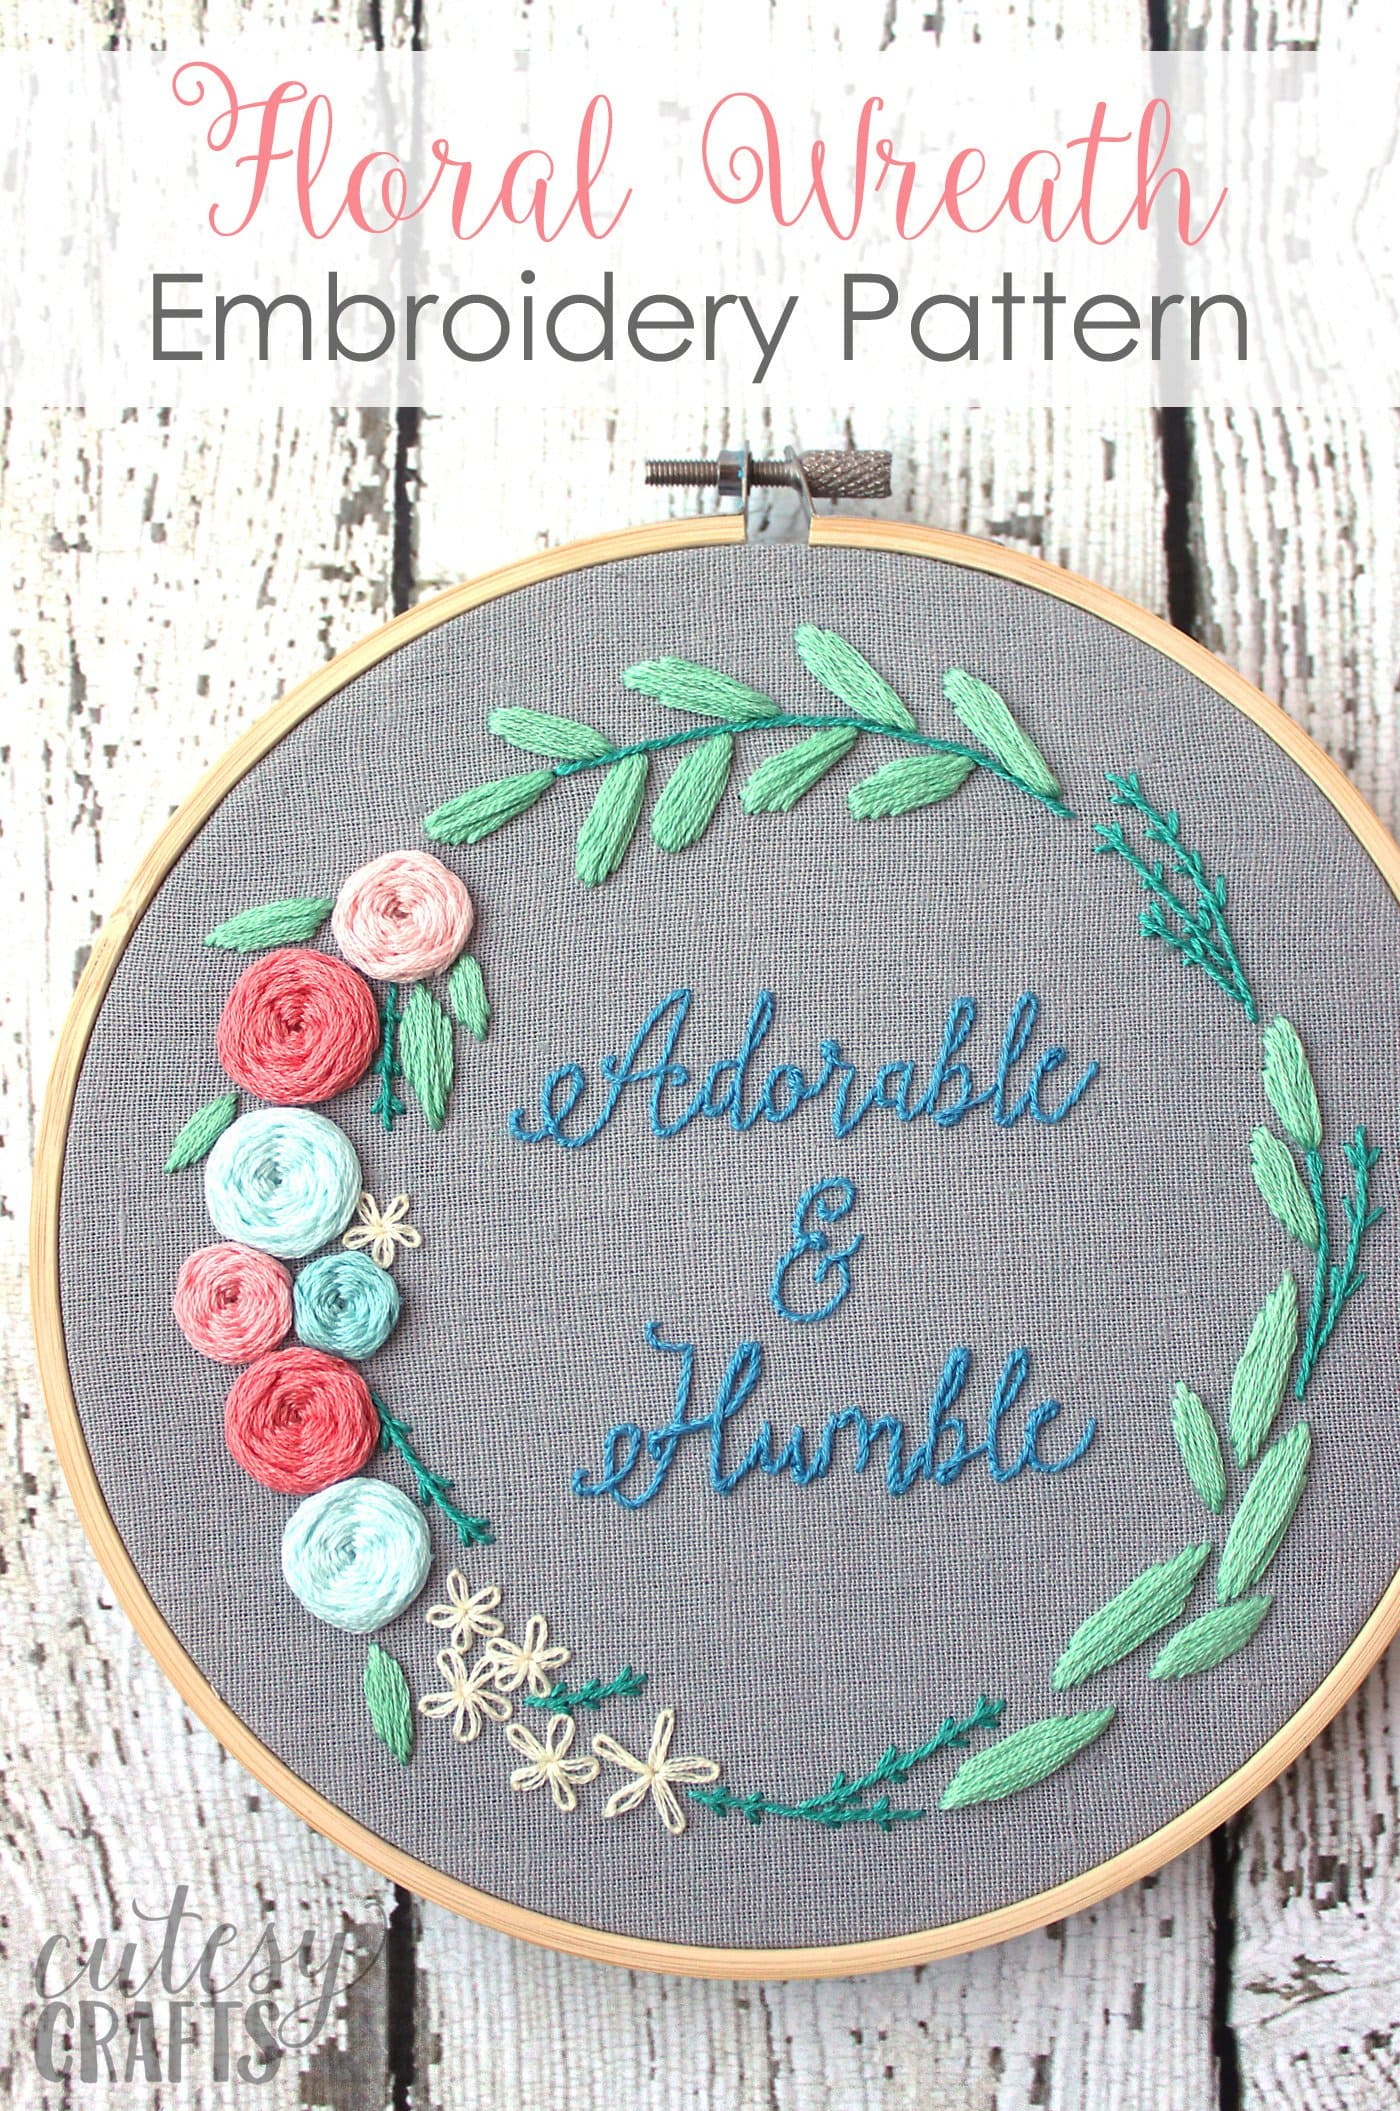 How To Make Hand Embroidery Patterns Adorable And Humble Free Floral Wreath Hand Embroidery Pattern